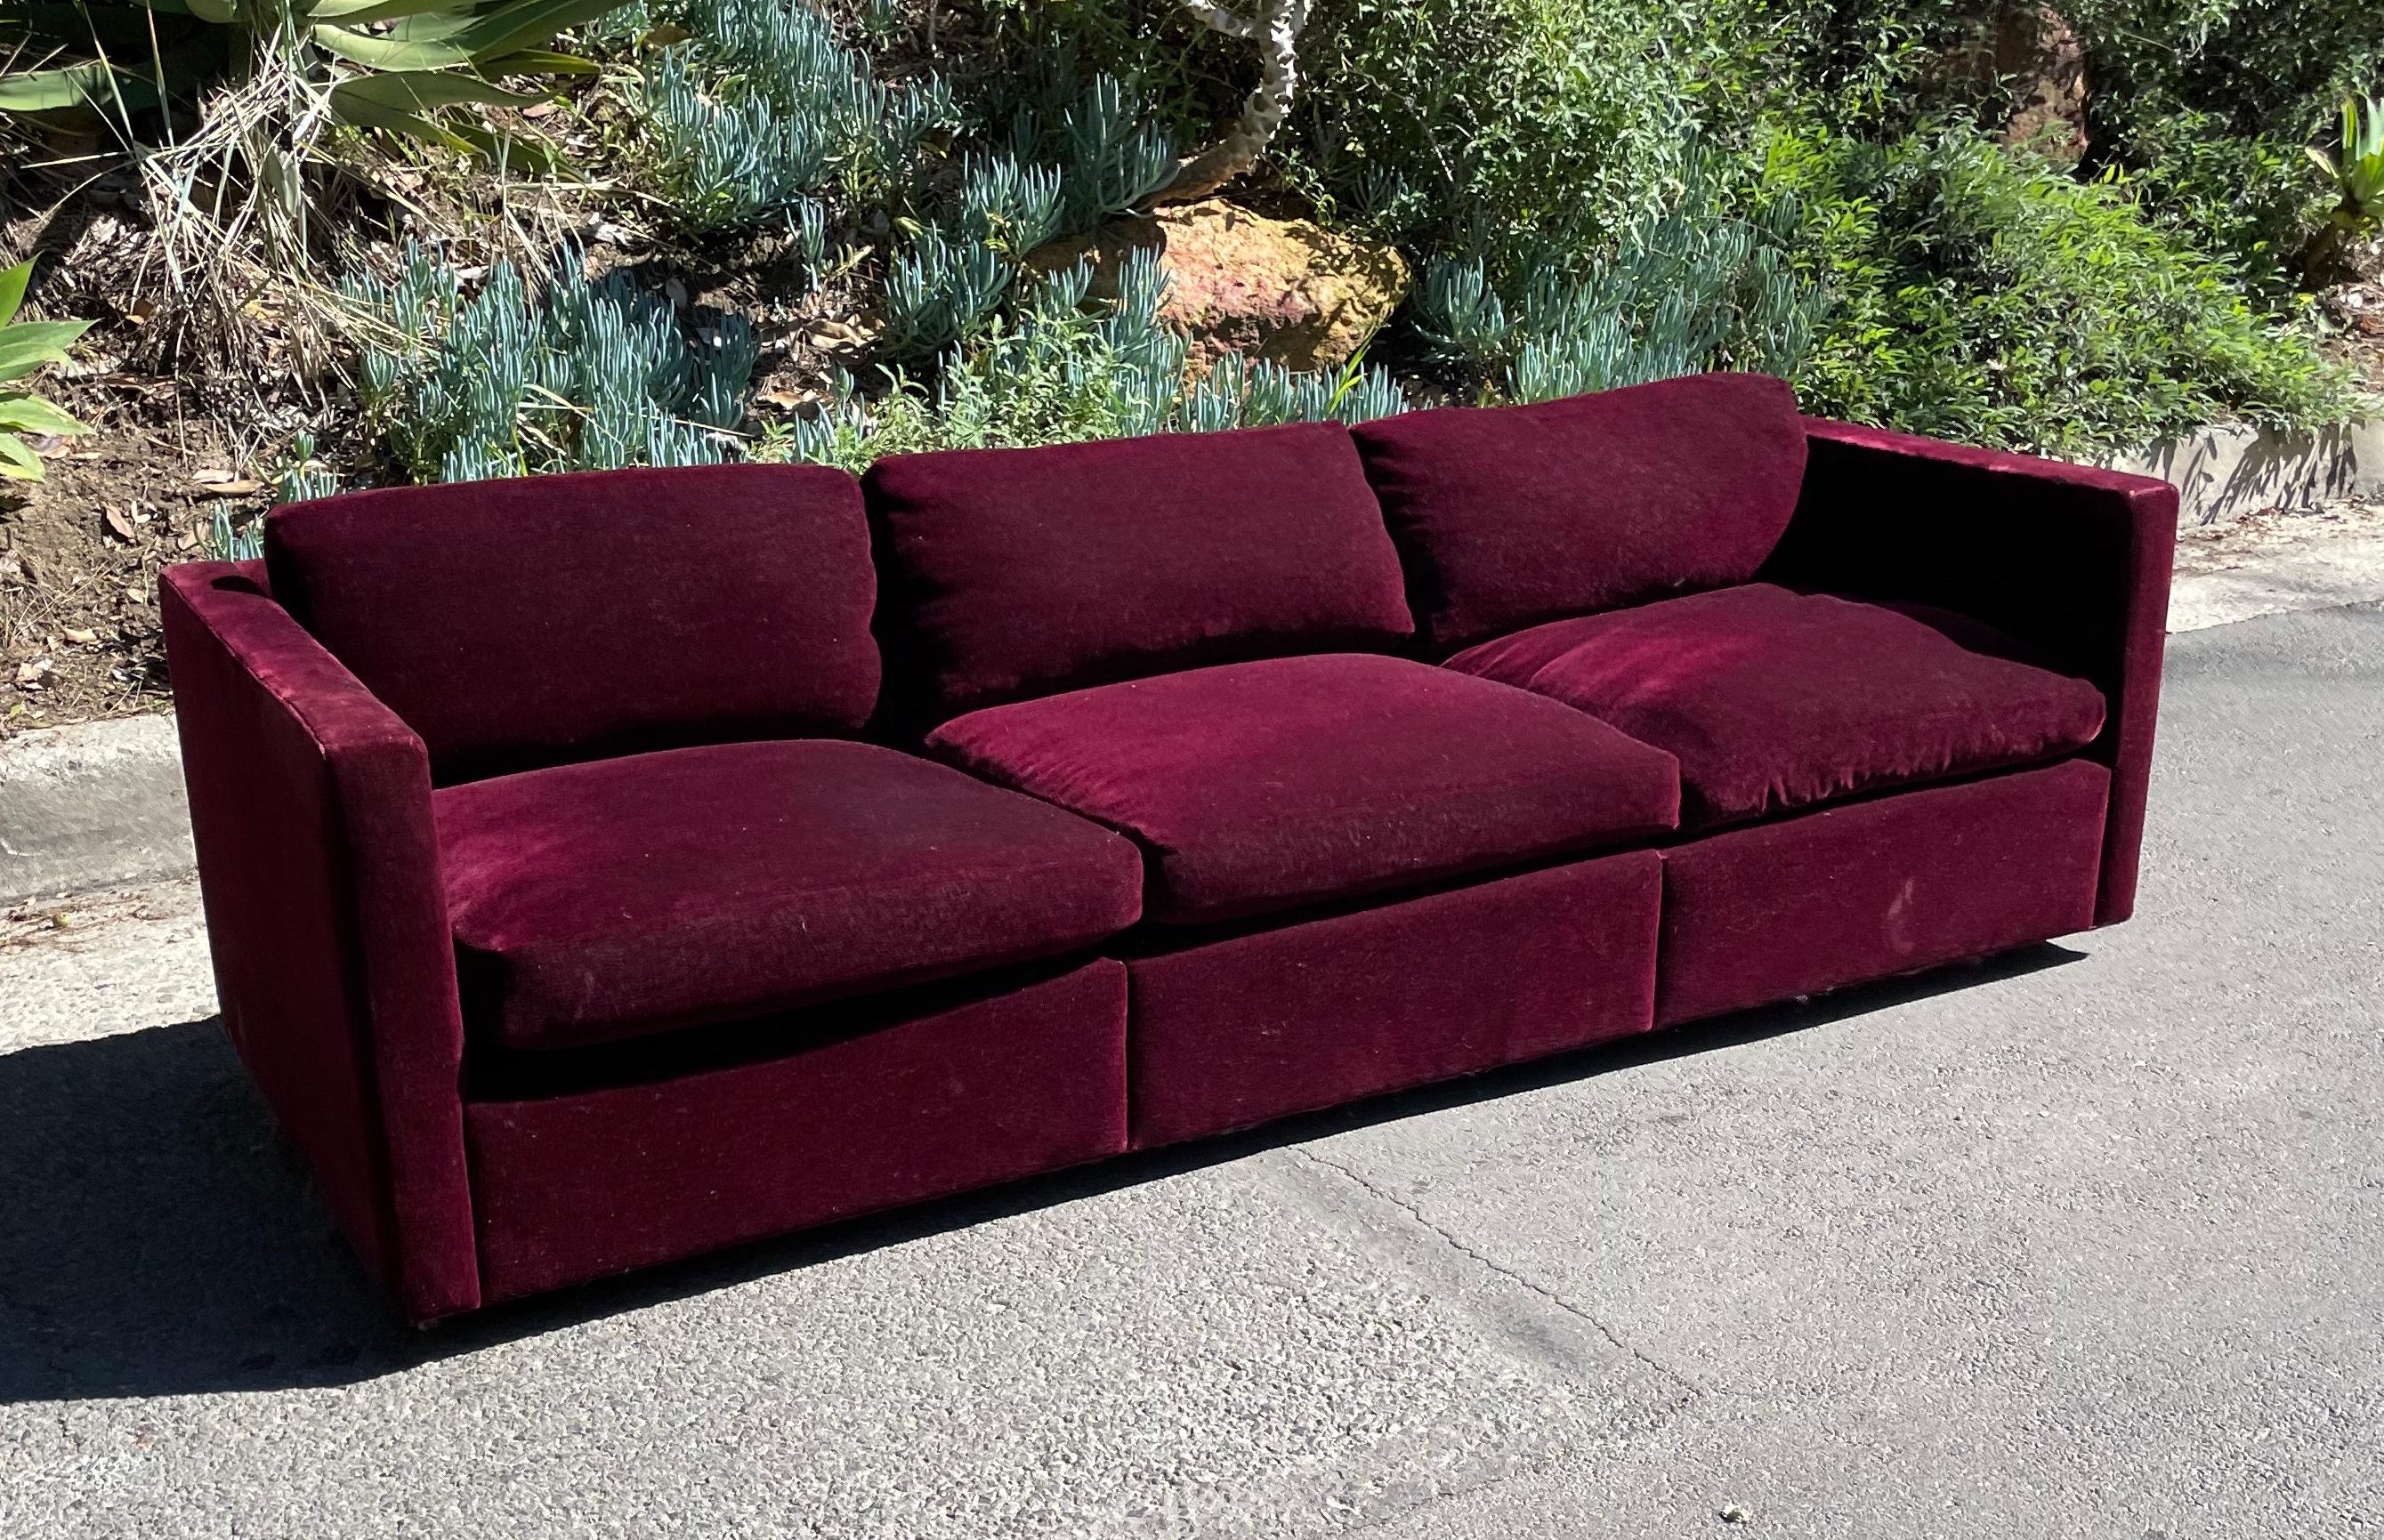 Late 20th Century Knoll Pfister Tuxedo Sofa in Original Red Mohair, 1970s